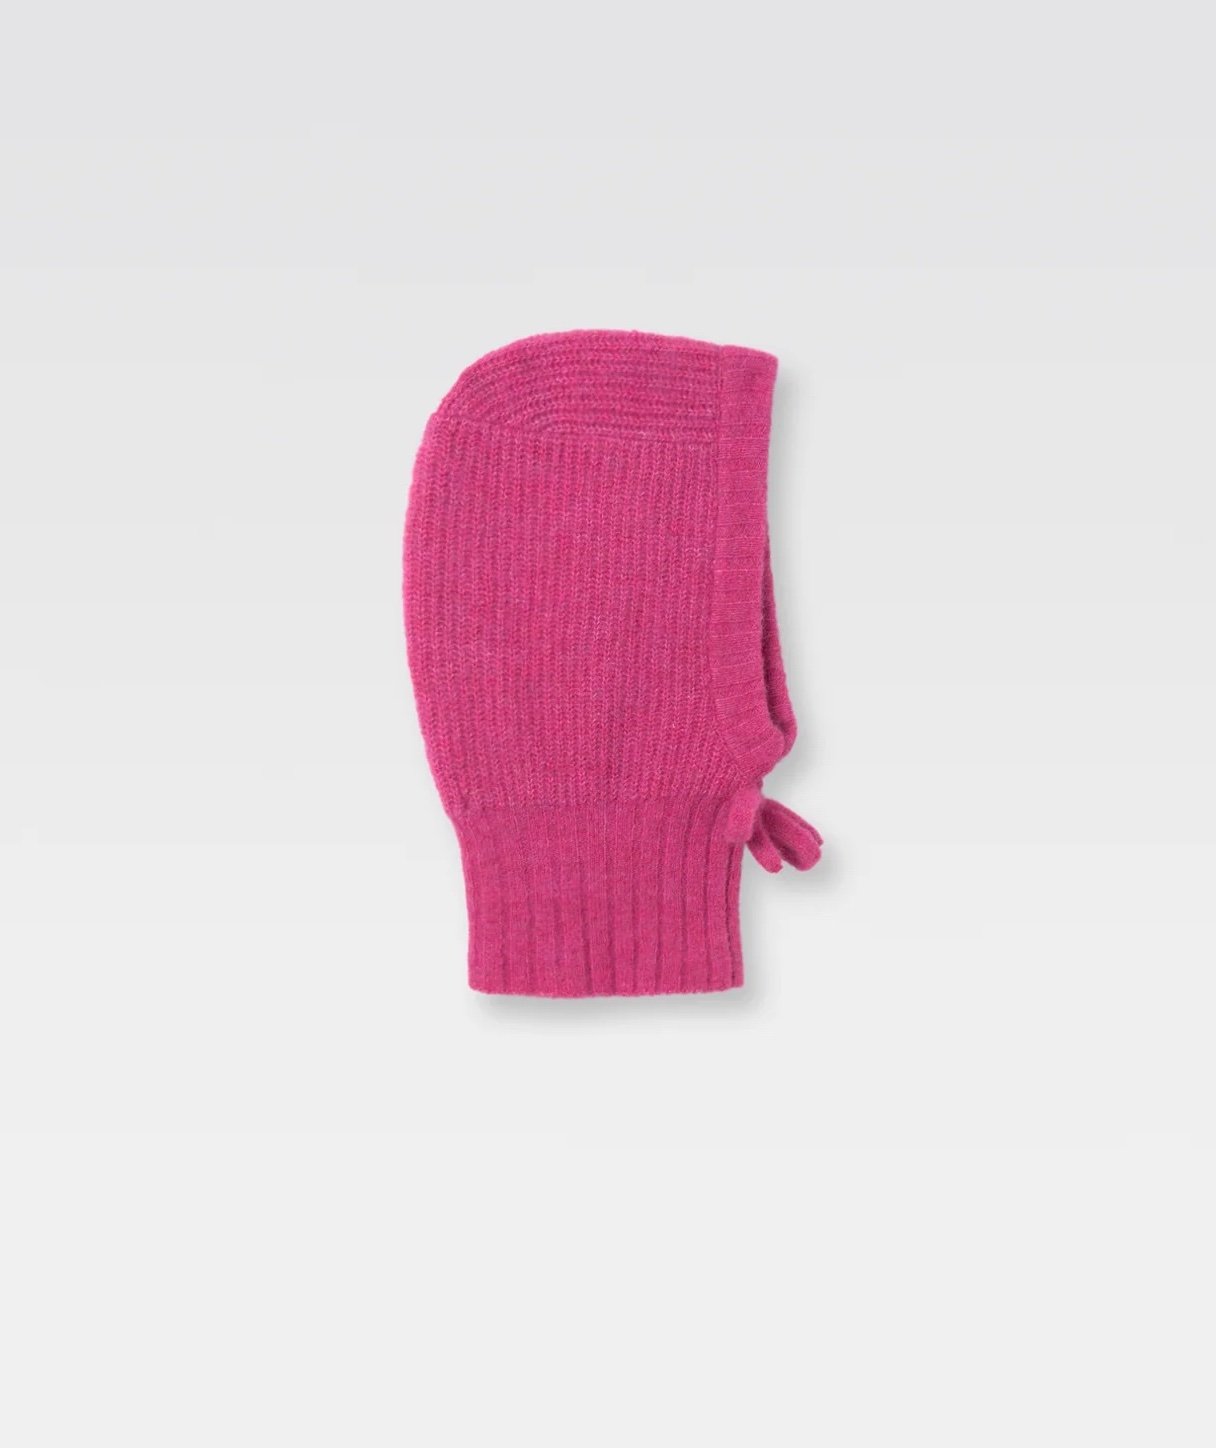 alice-balaclava-pink passerby holiday gift guide 2023.jpg